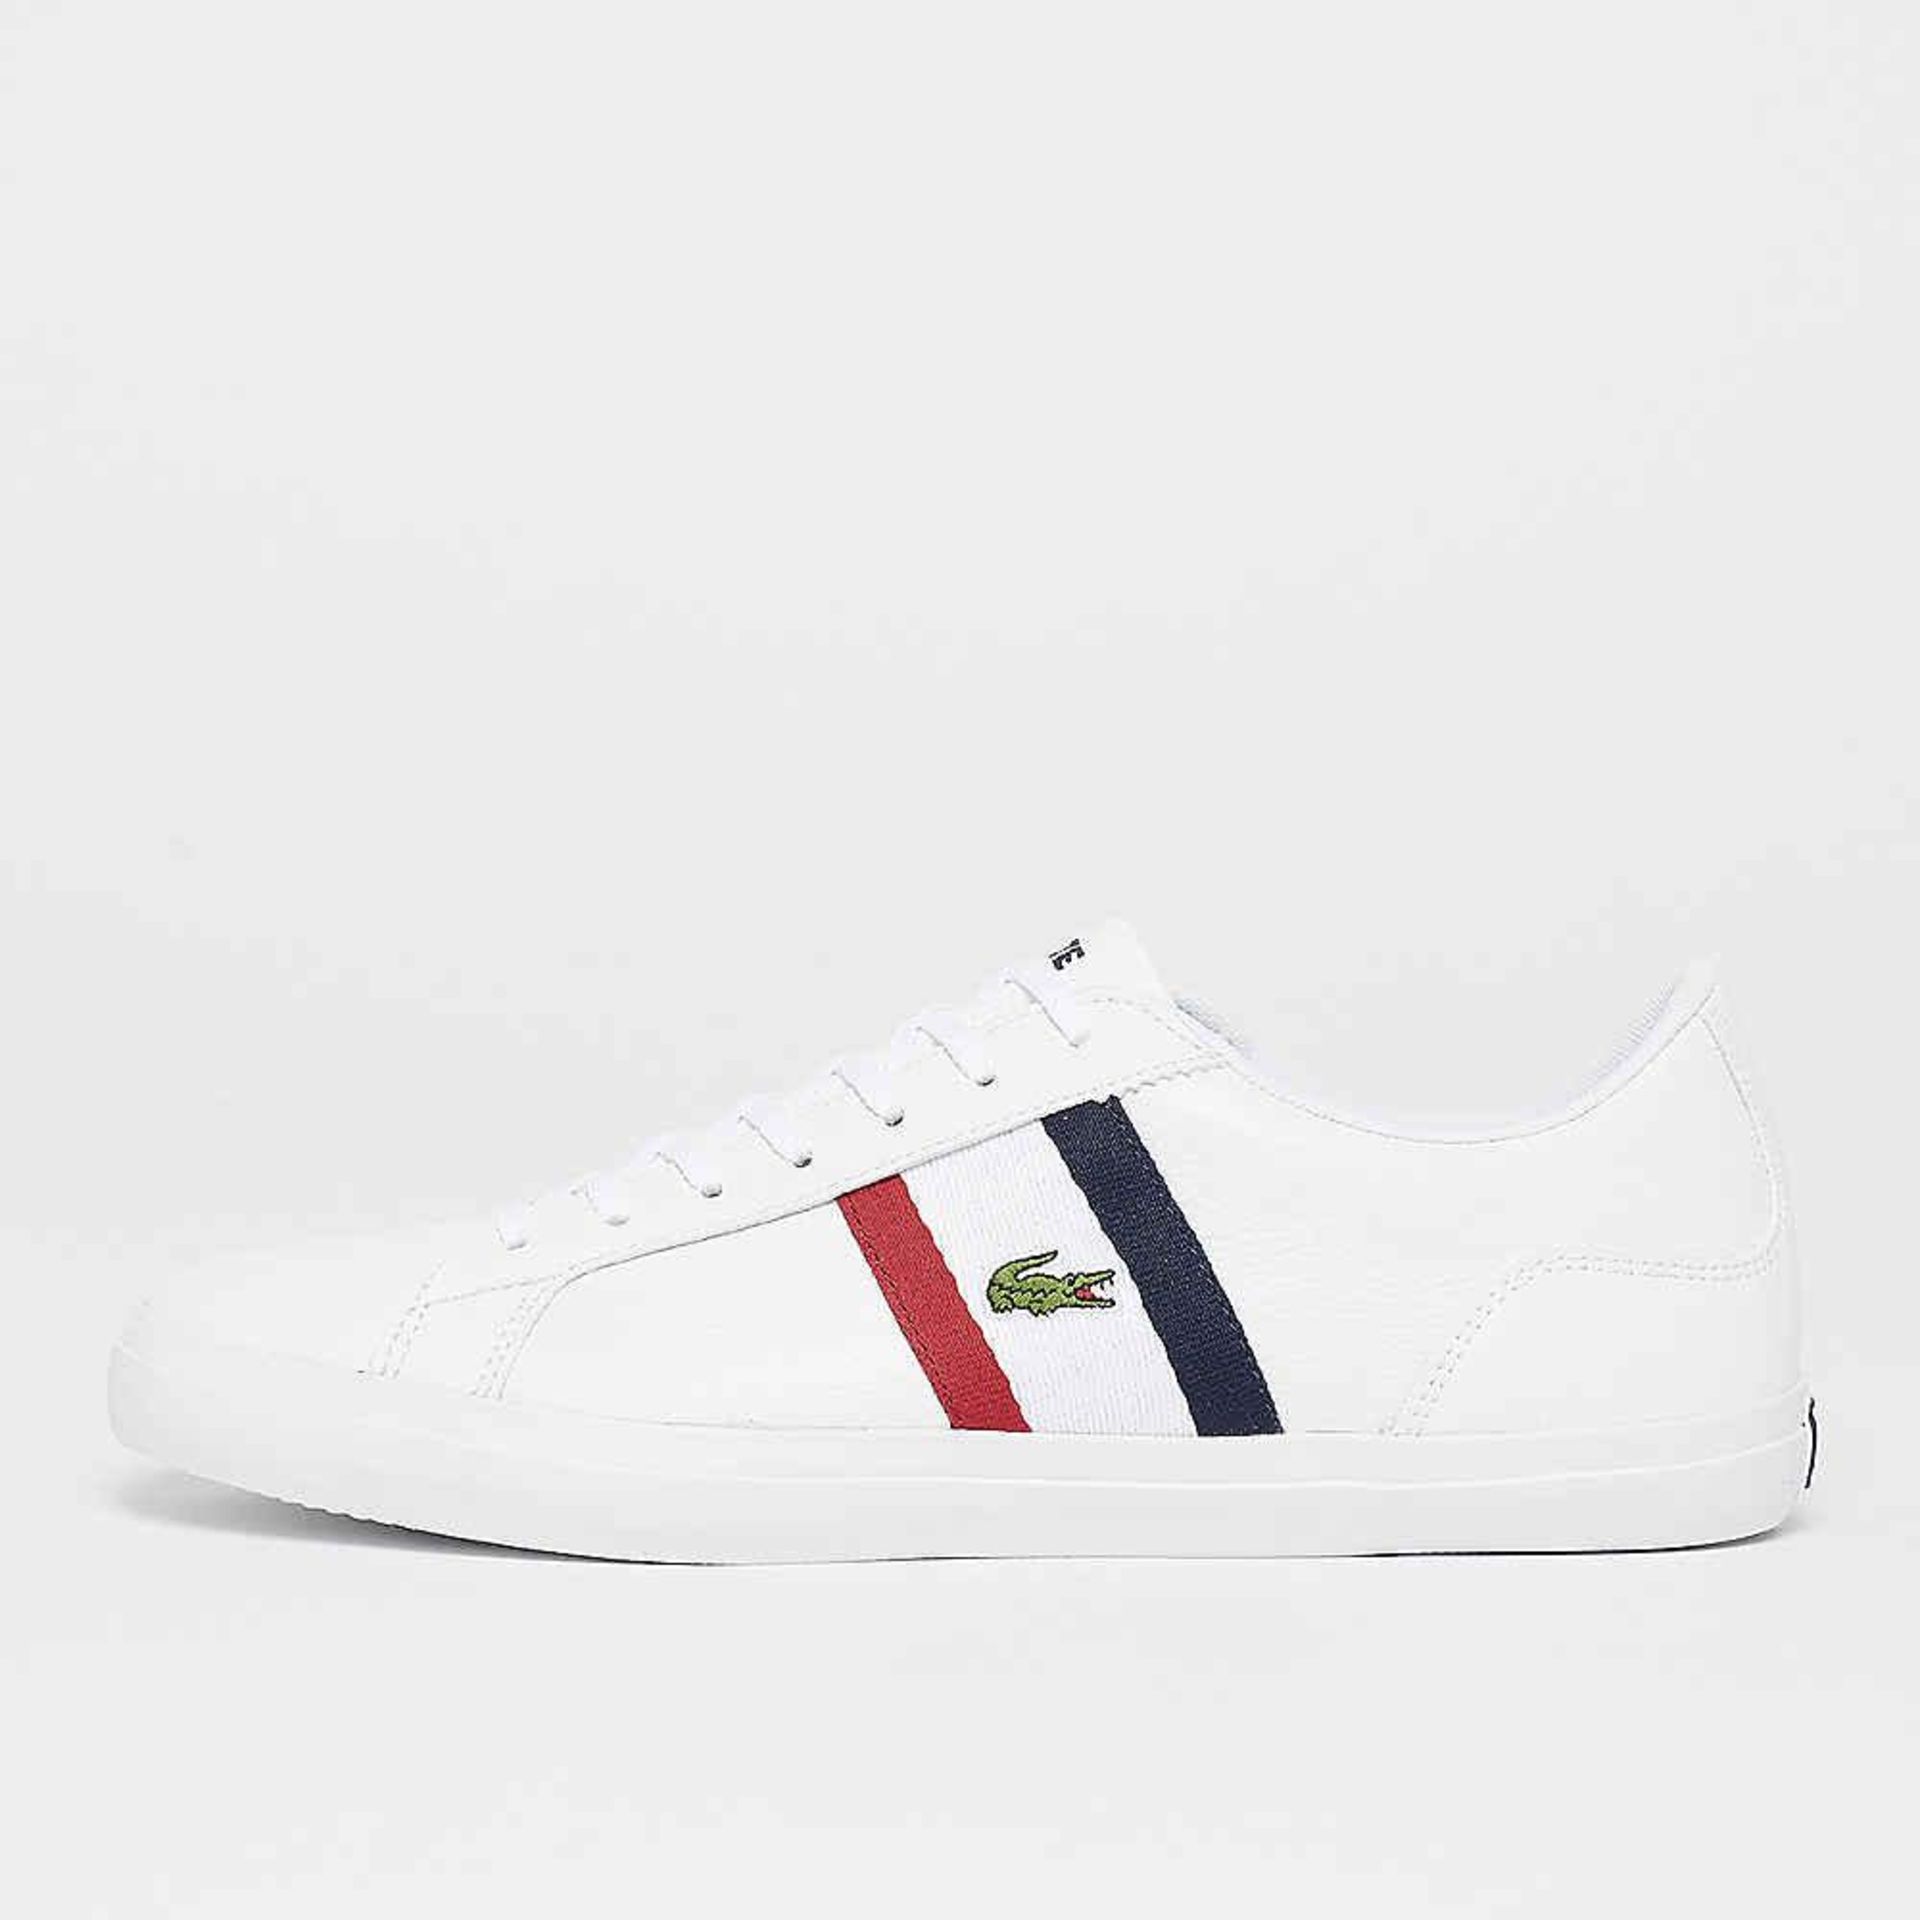 + VAT Brand New Lacoste Trainers UK Size 9.5 - White Red Navy - Leather and Synthetic - EU Size